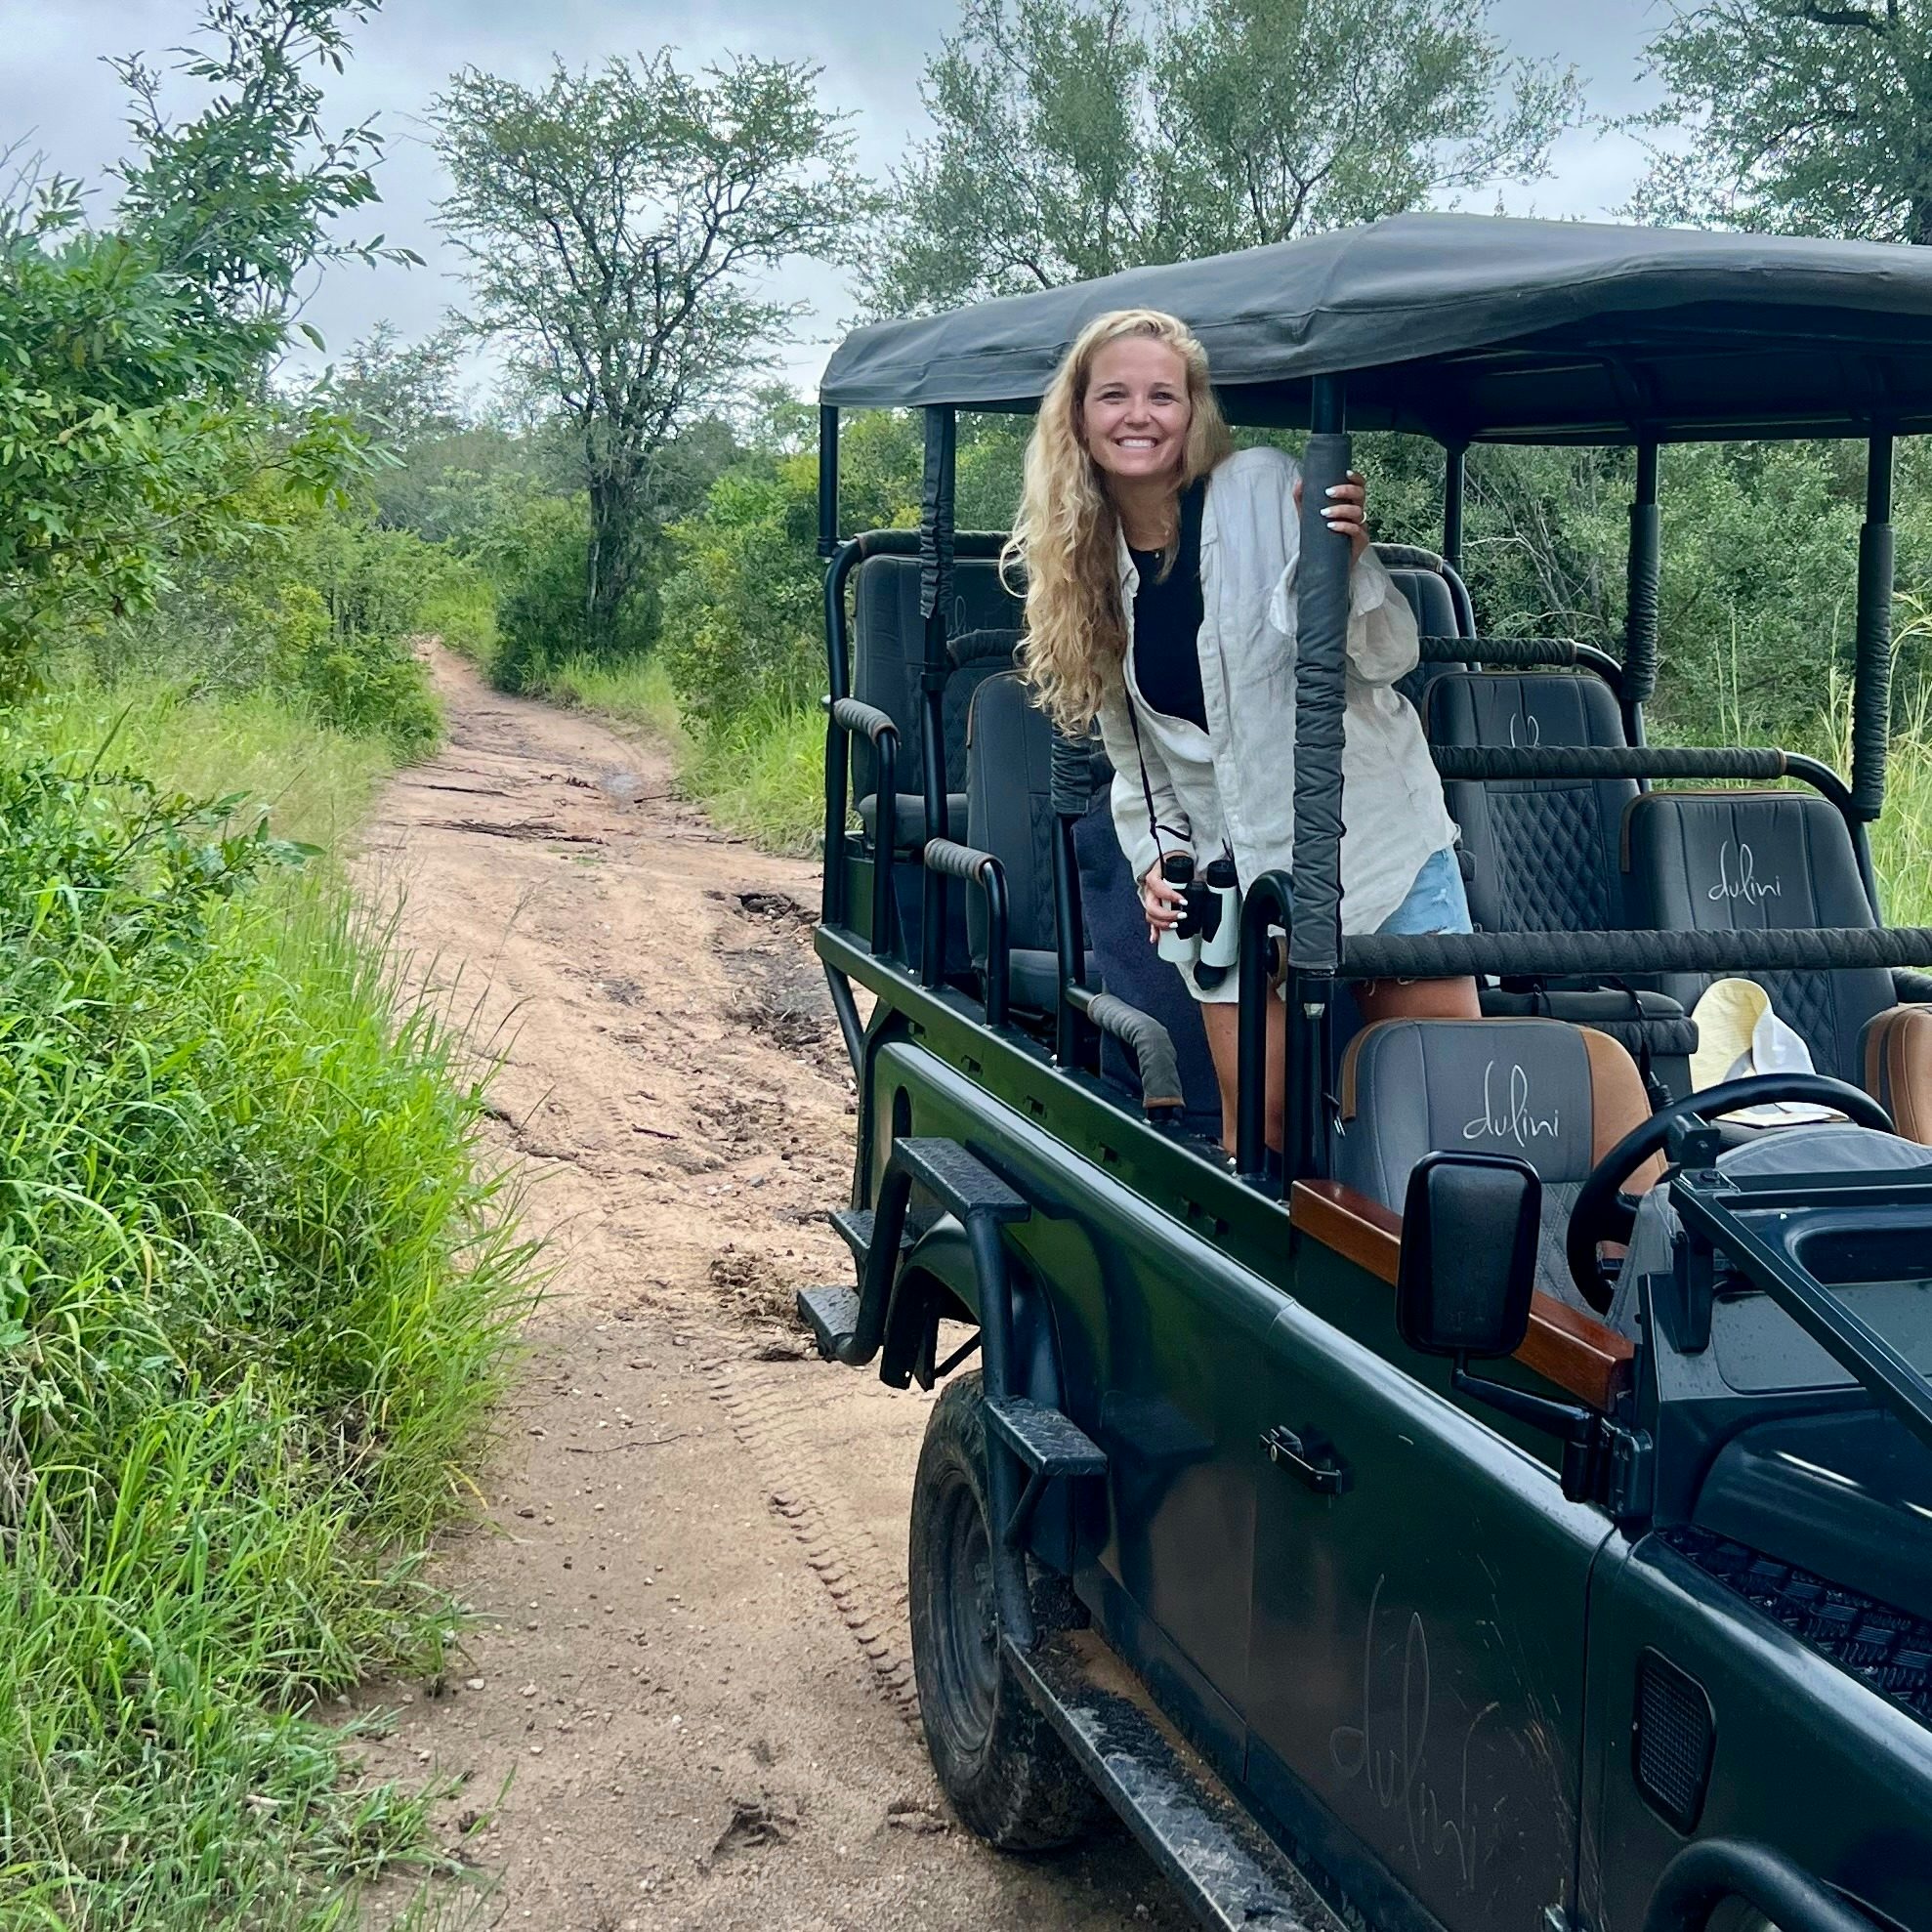 Travel advisor Jeannie Peters in a white top standing up in an open-air vehicle on a trail